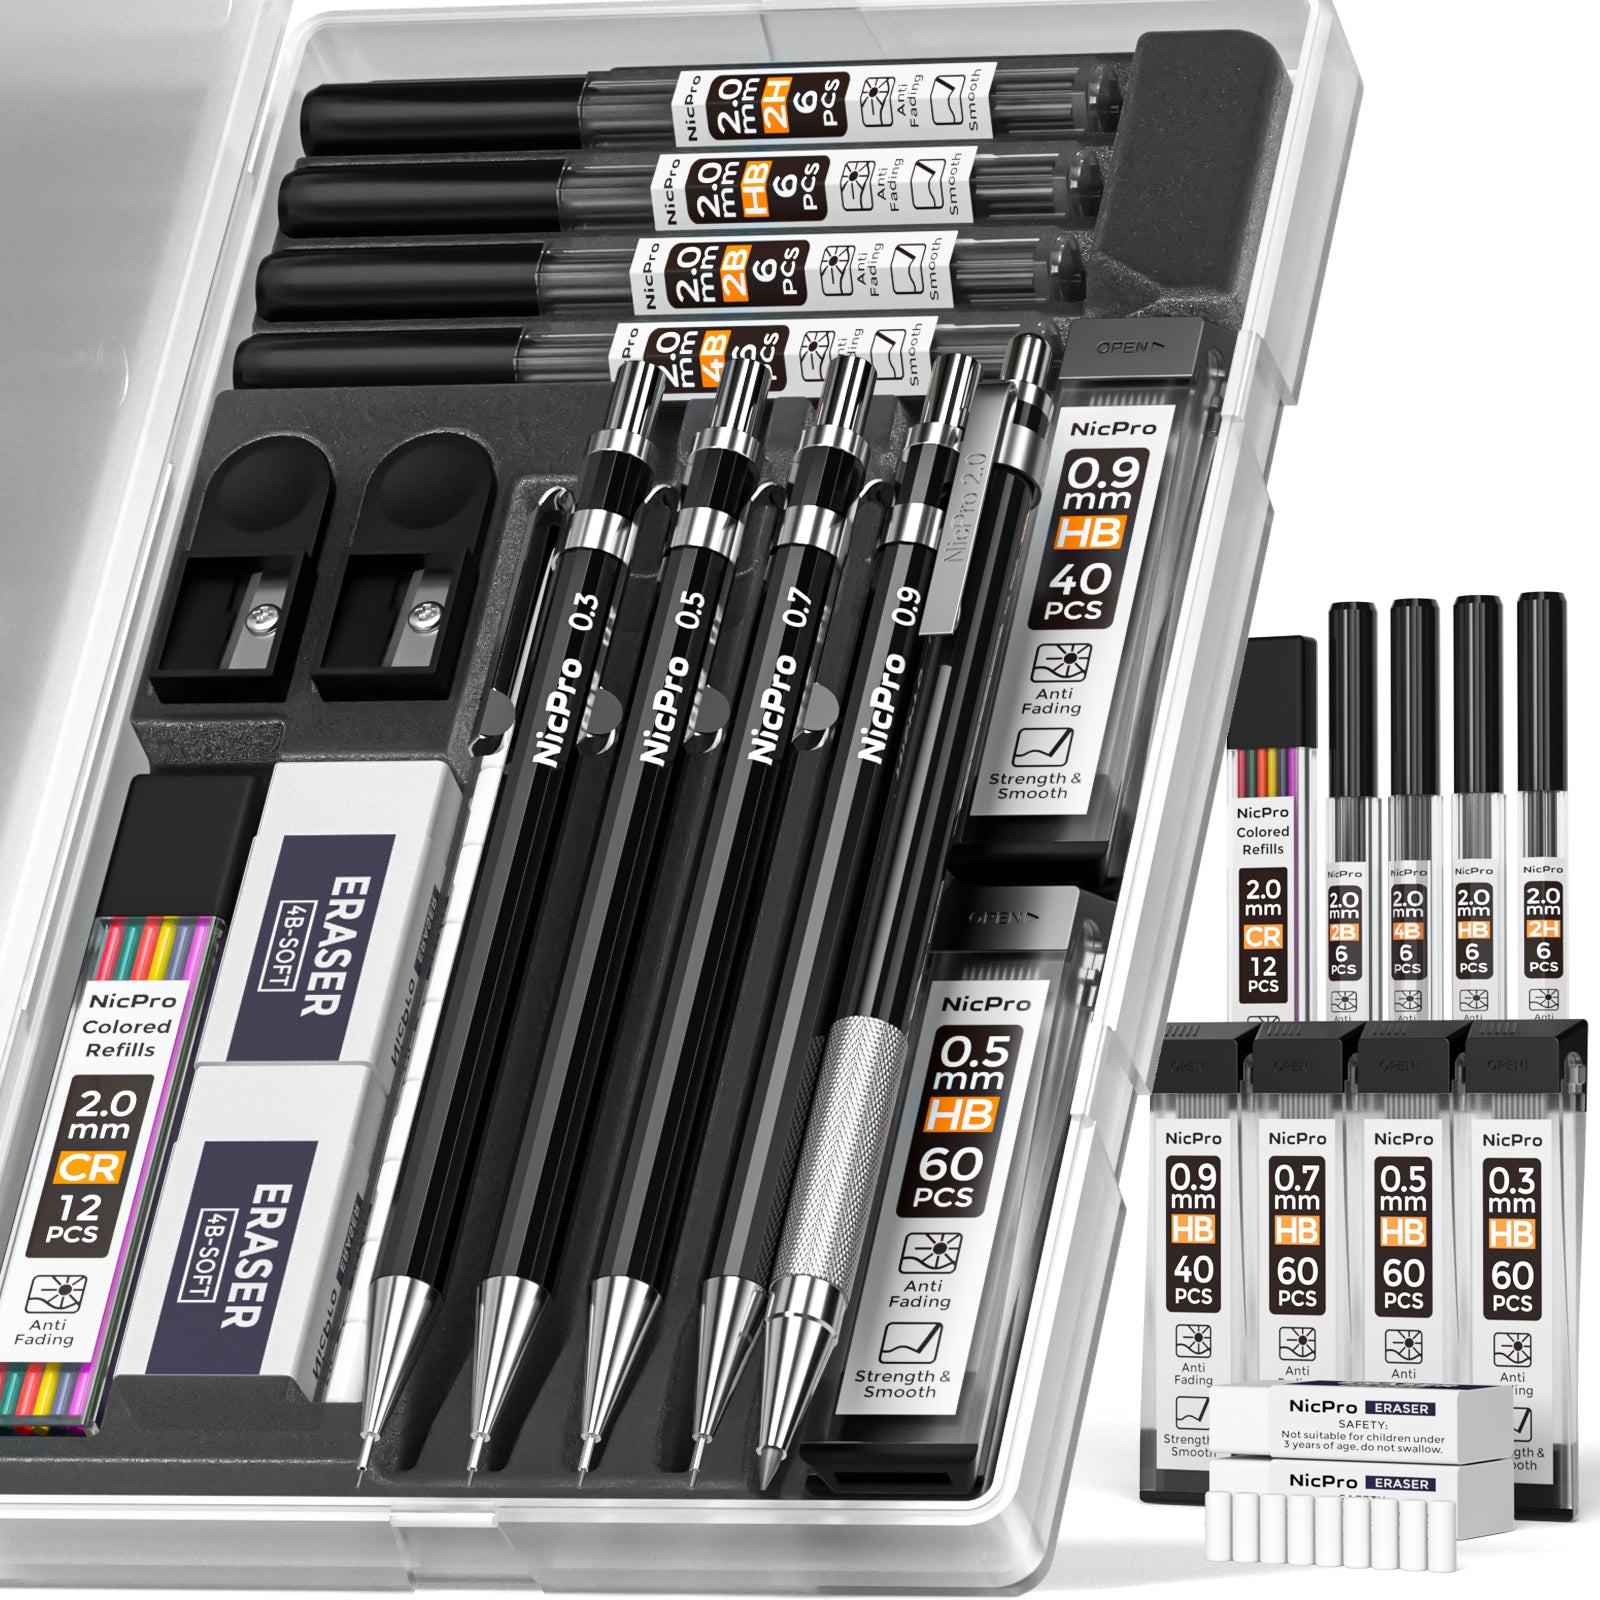 Nicpro 27PCS Art Mechanical Pencils Set in Case, Metal Drafting Pencil 0.5,  0.7, 0.9 mm & 2mm with 13 Tube Lead Refills(4B 2B HB 2H 4H Colors)